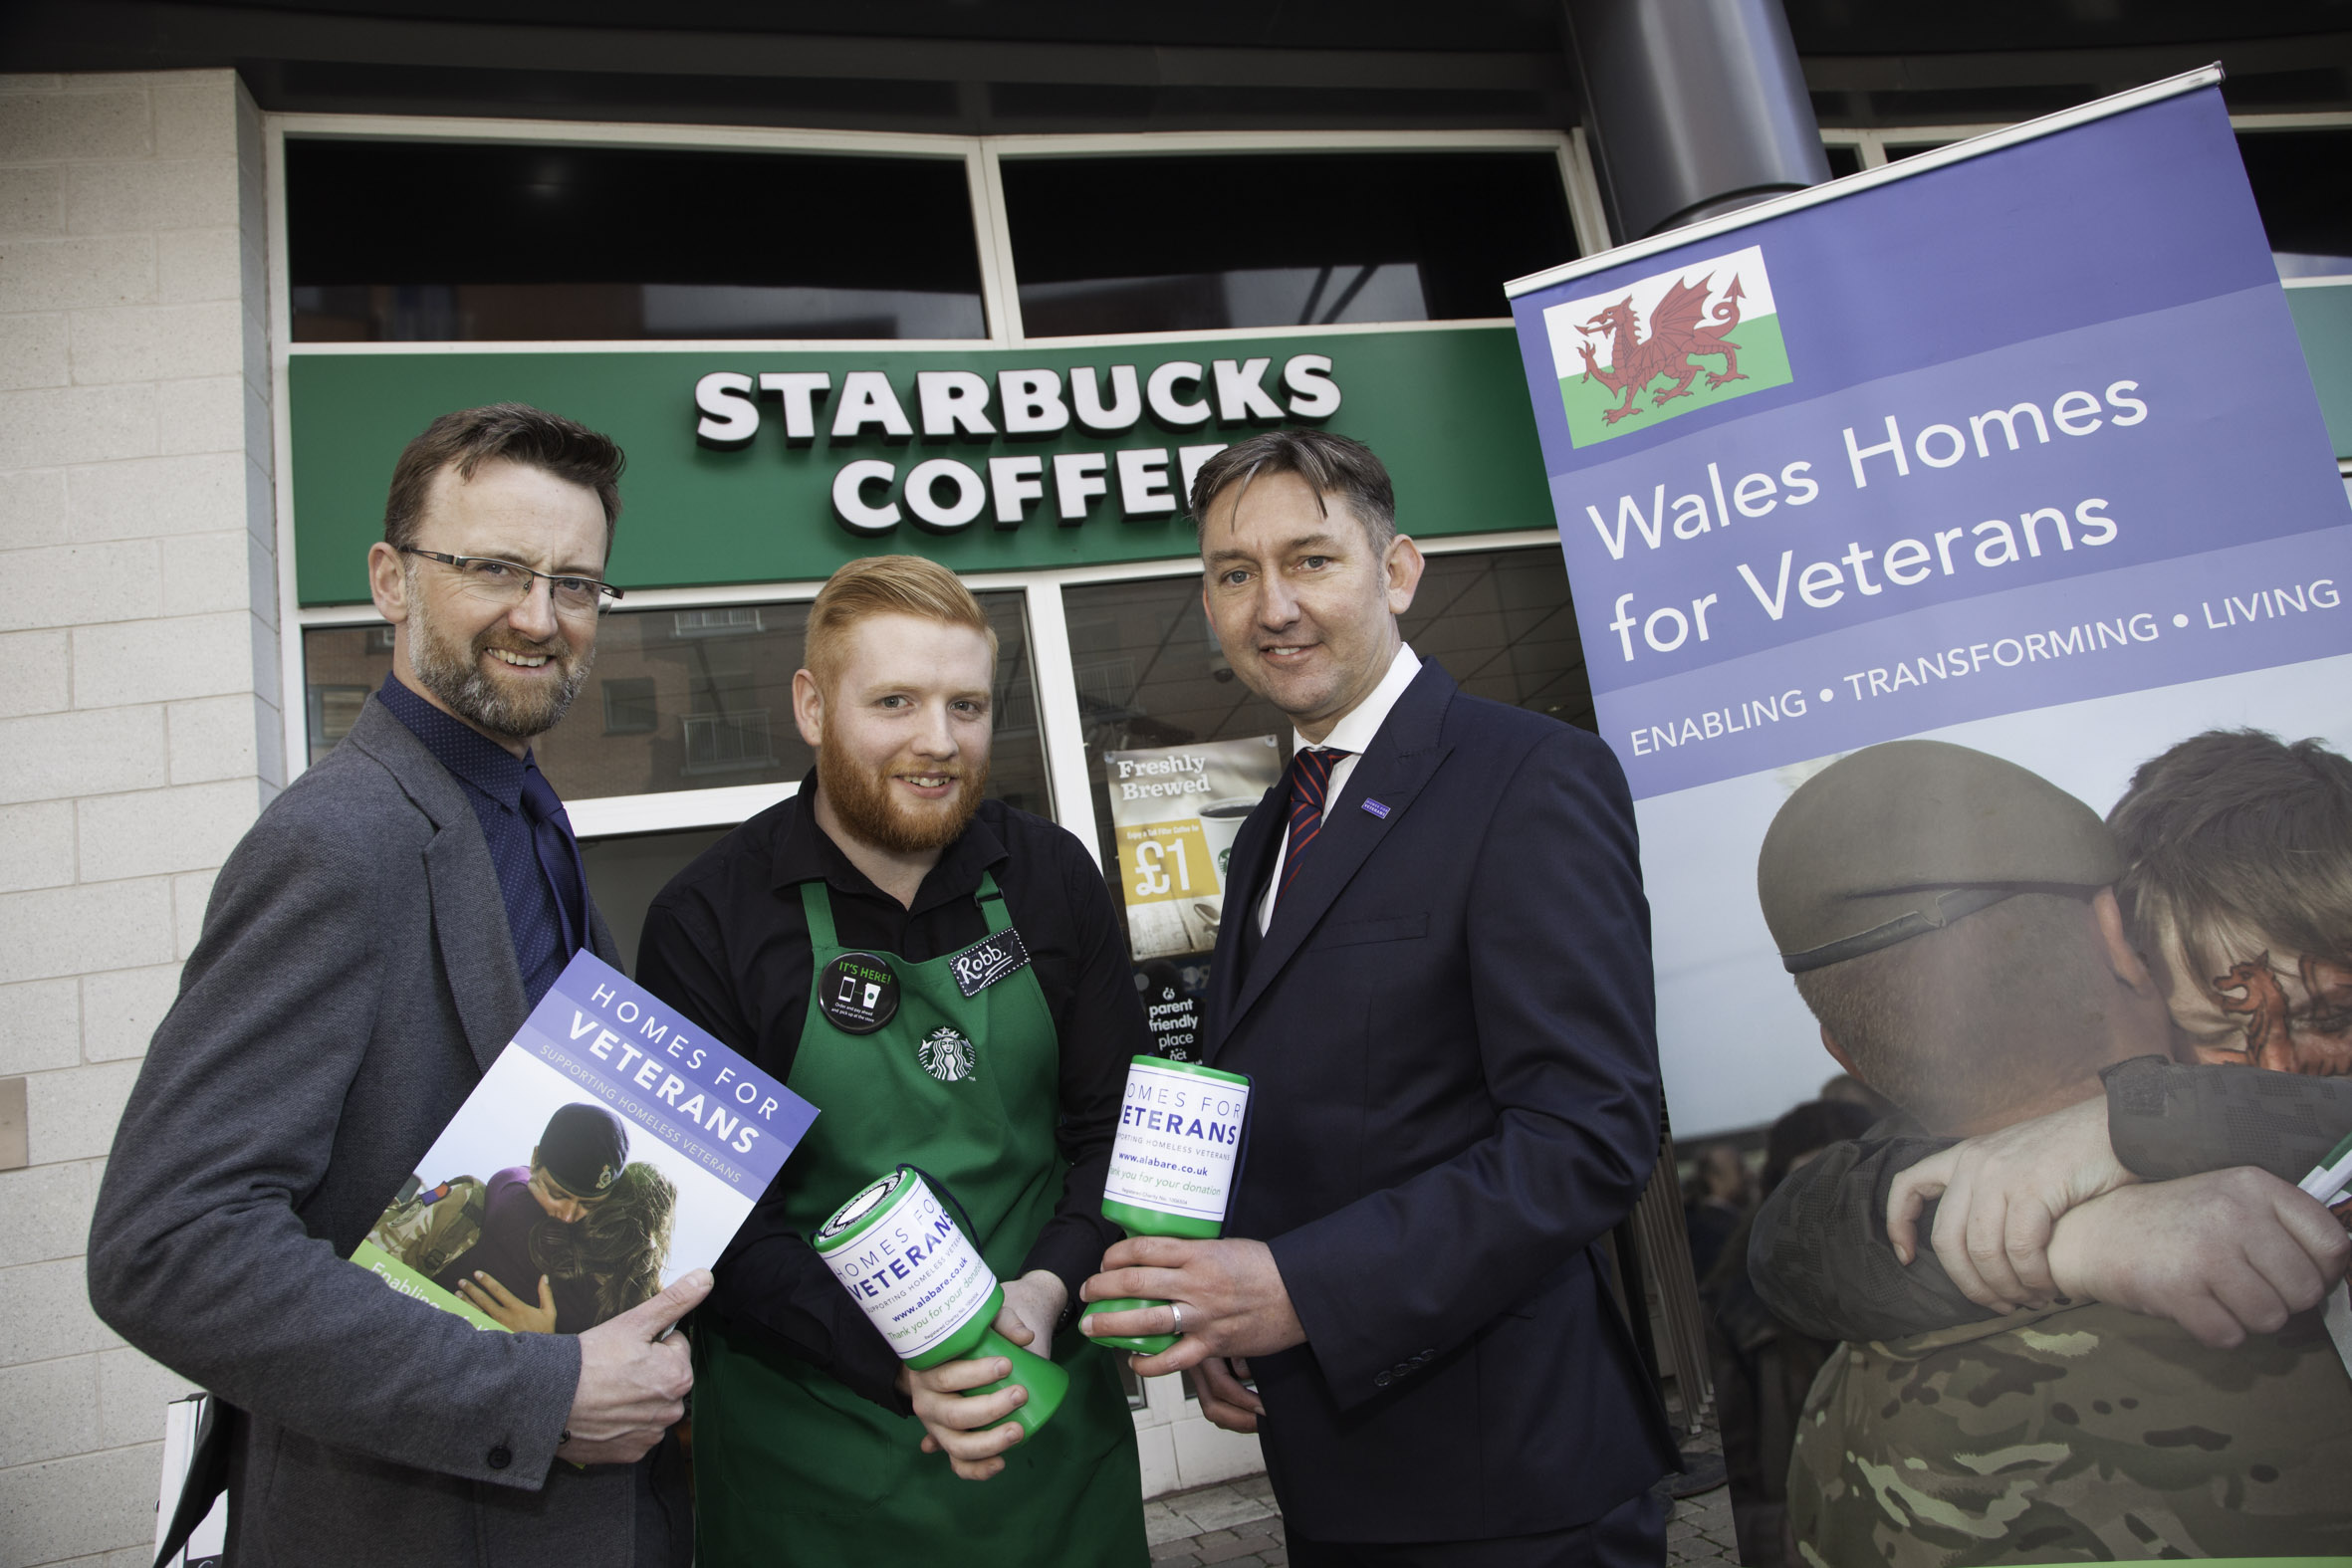 Coffee house team spring into action for veterans